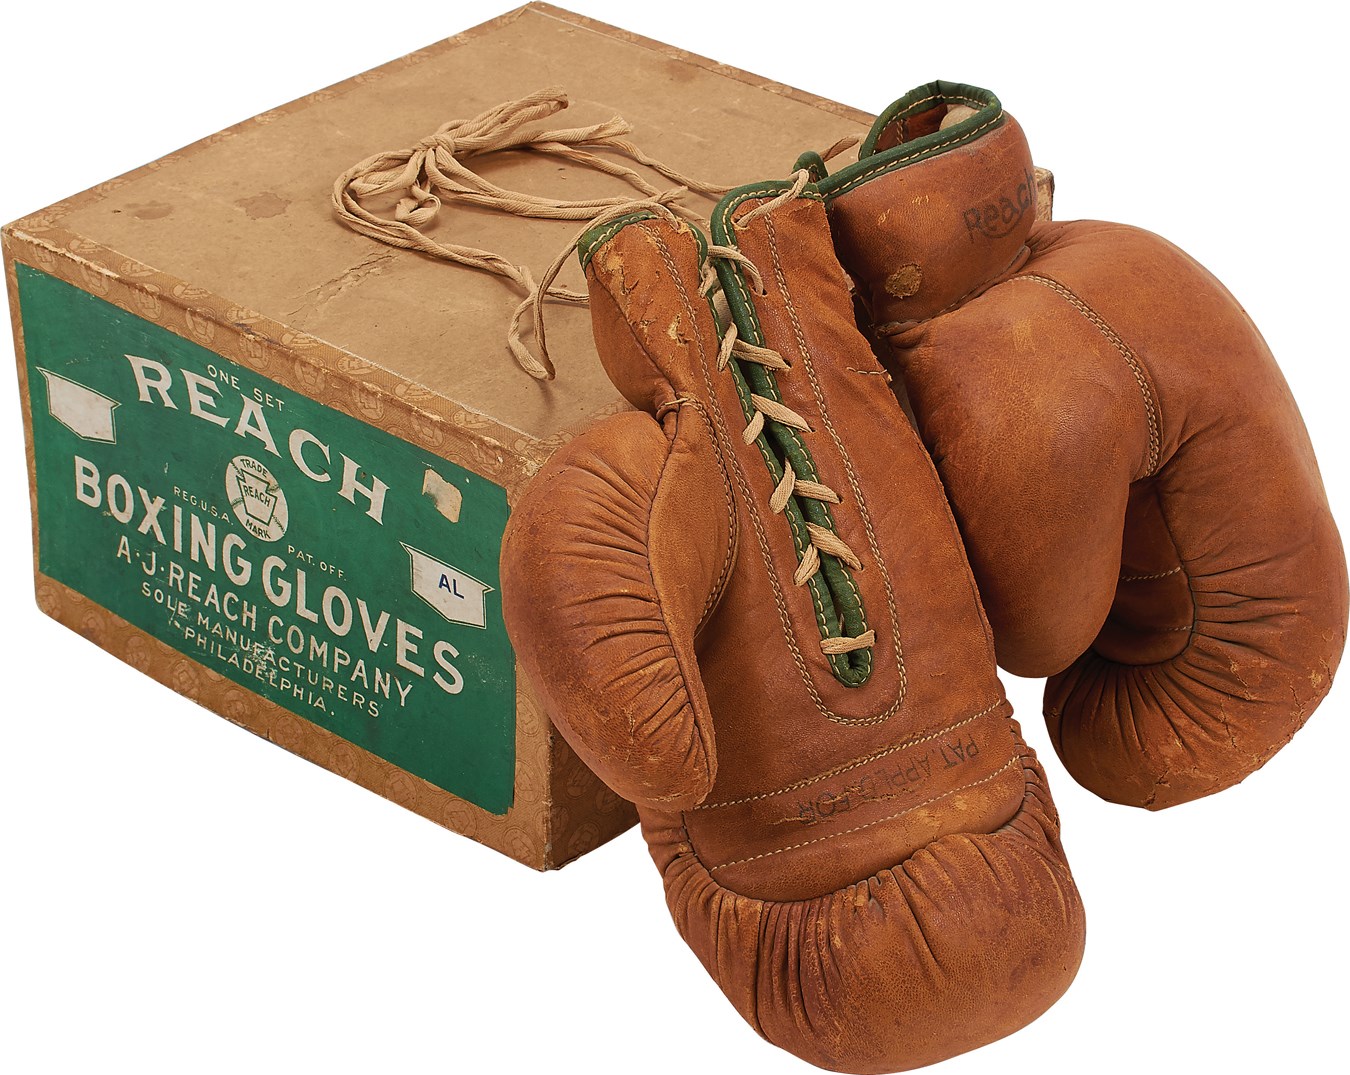 Early 1900s Reach Boxing Gloves in Original Box